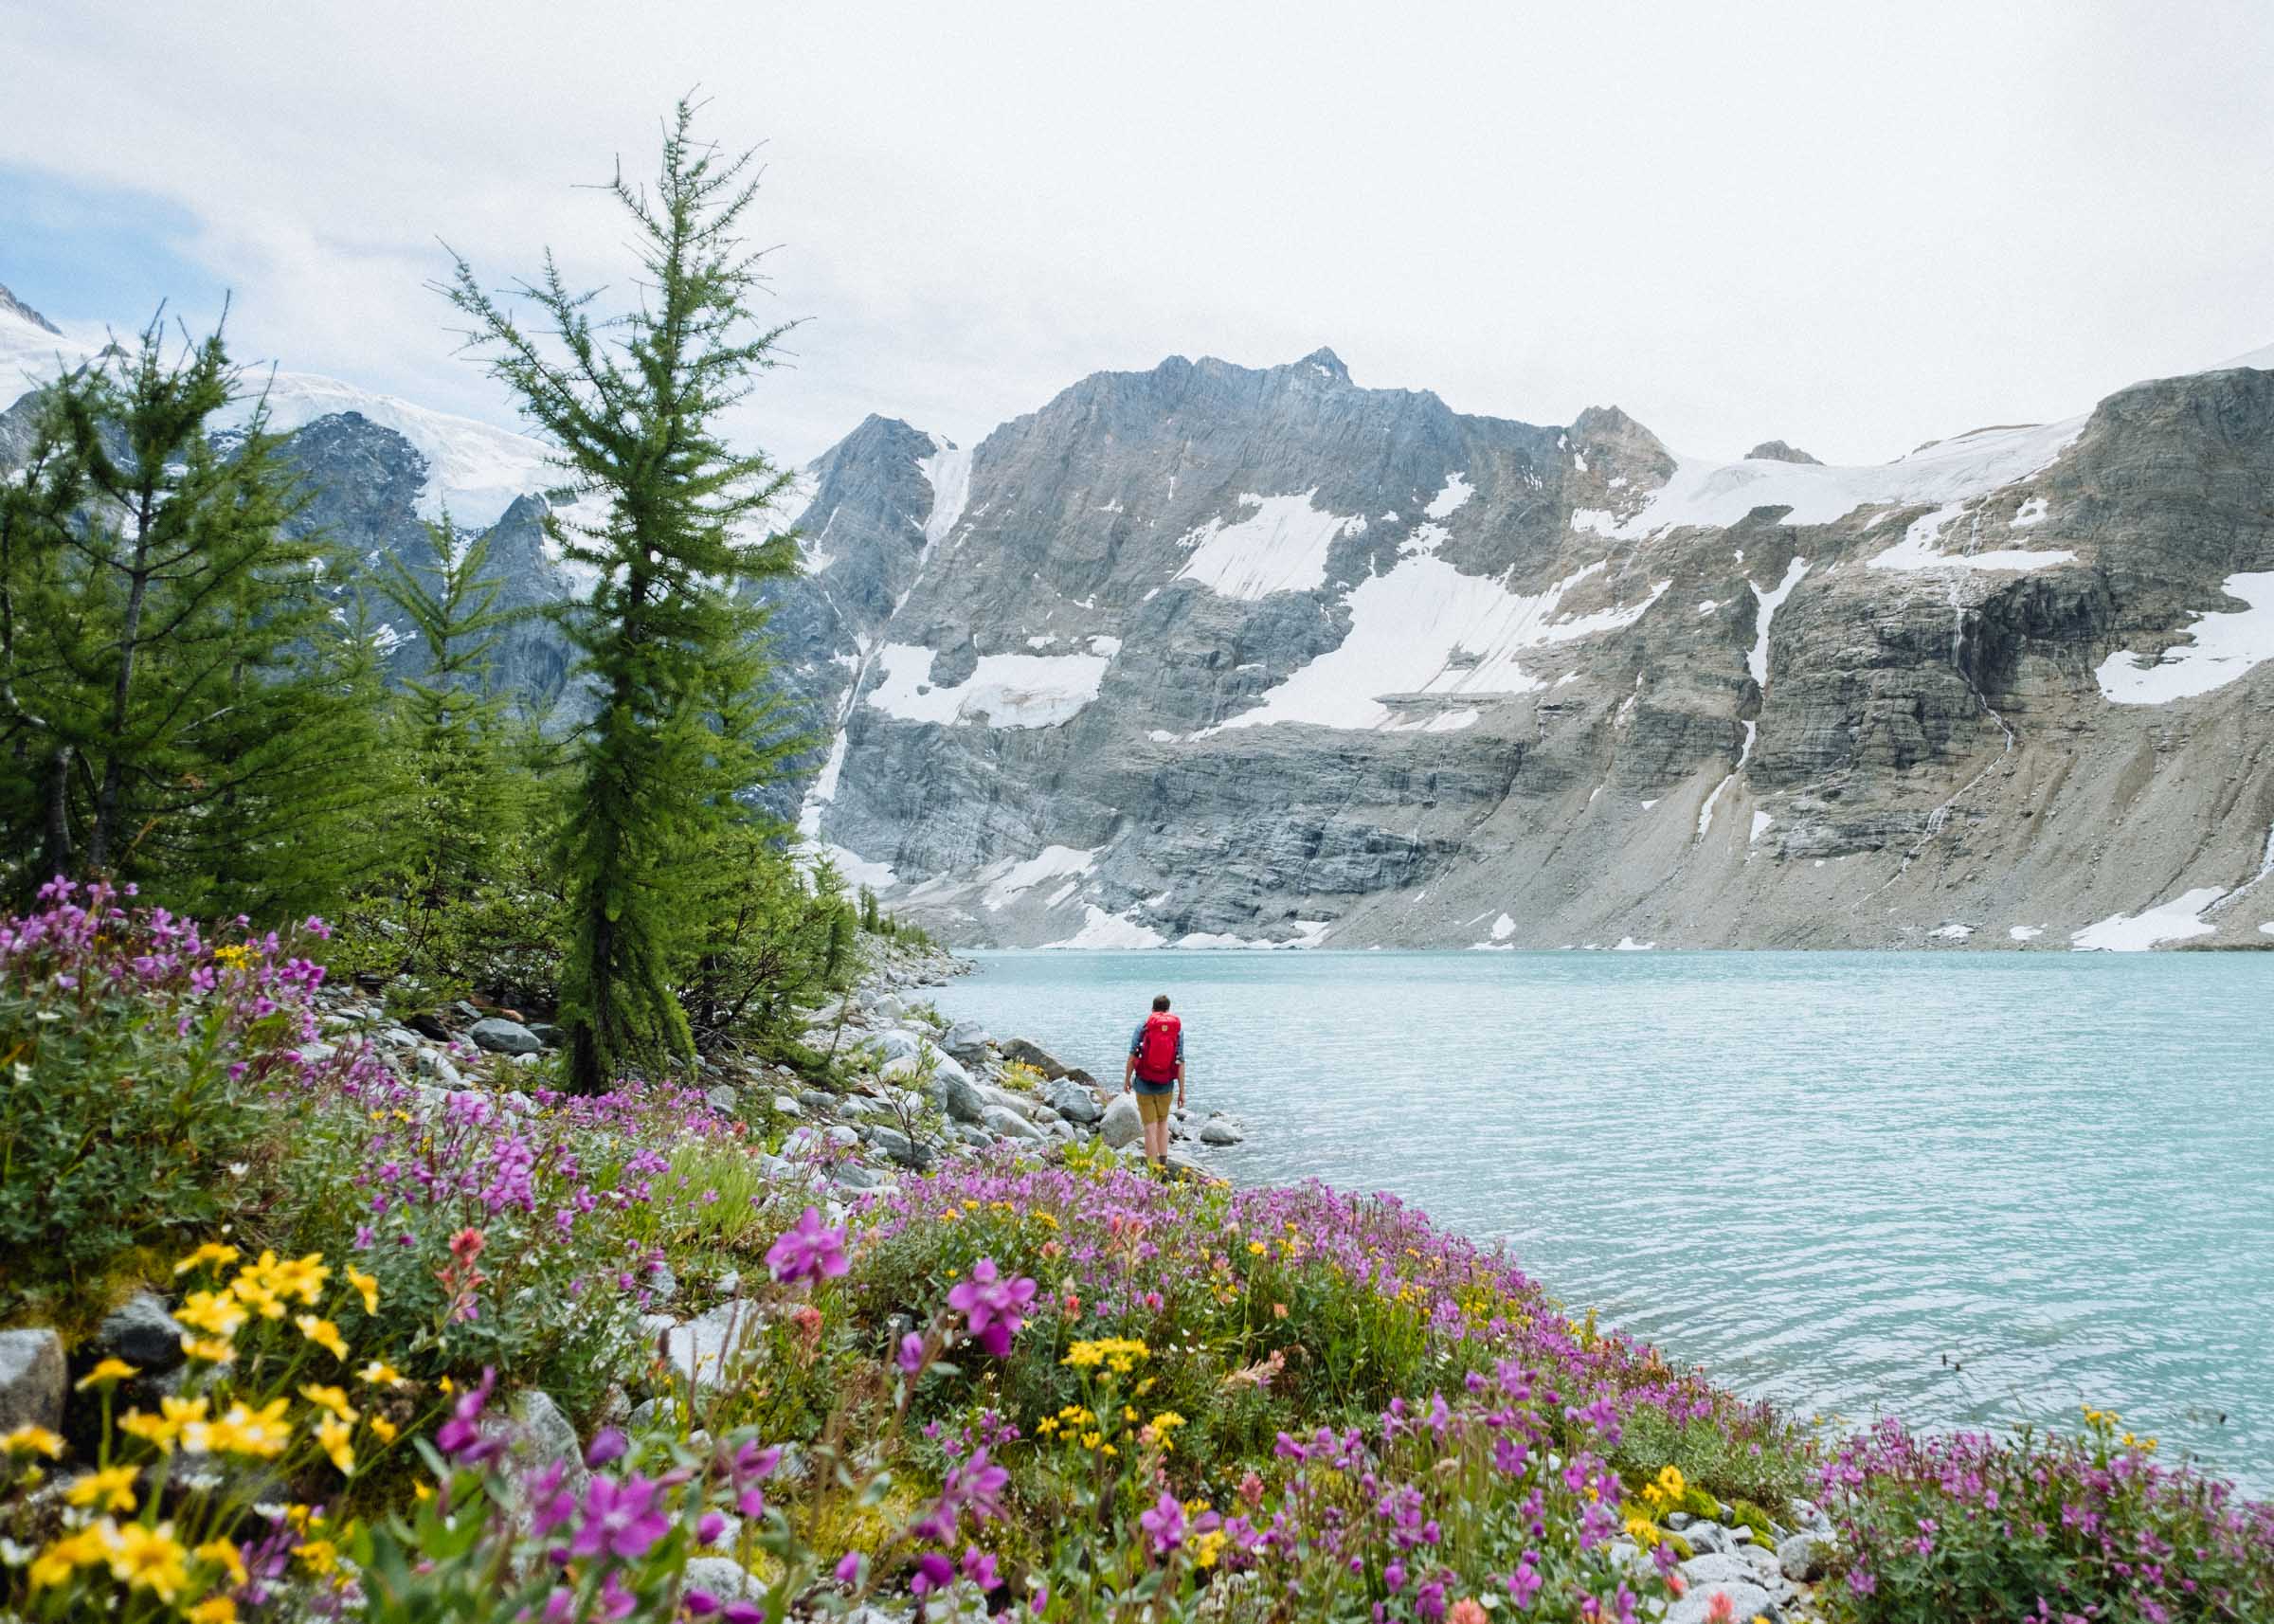 Larch meadows and wildflowers on the shores of Lake of the Hanging Glacier